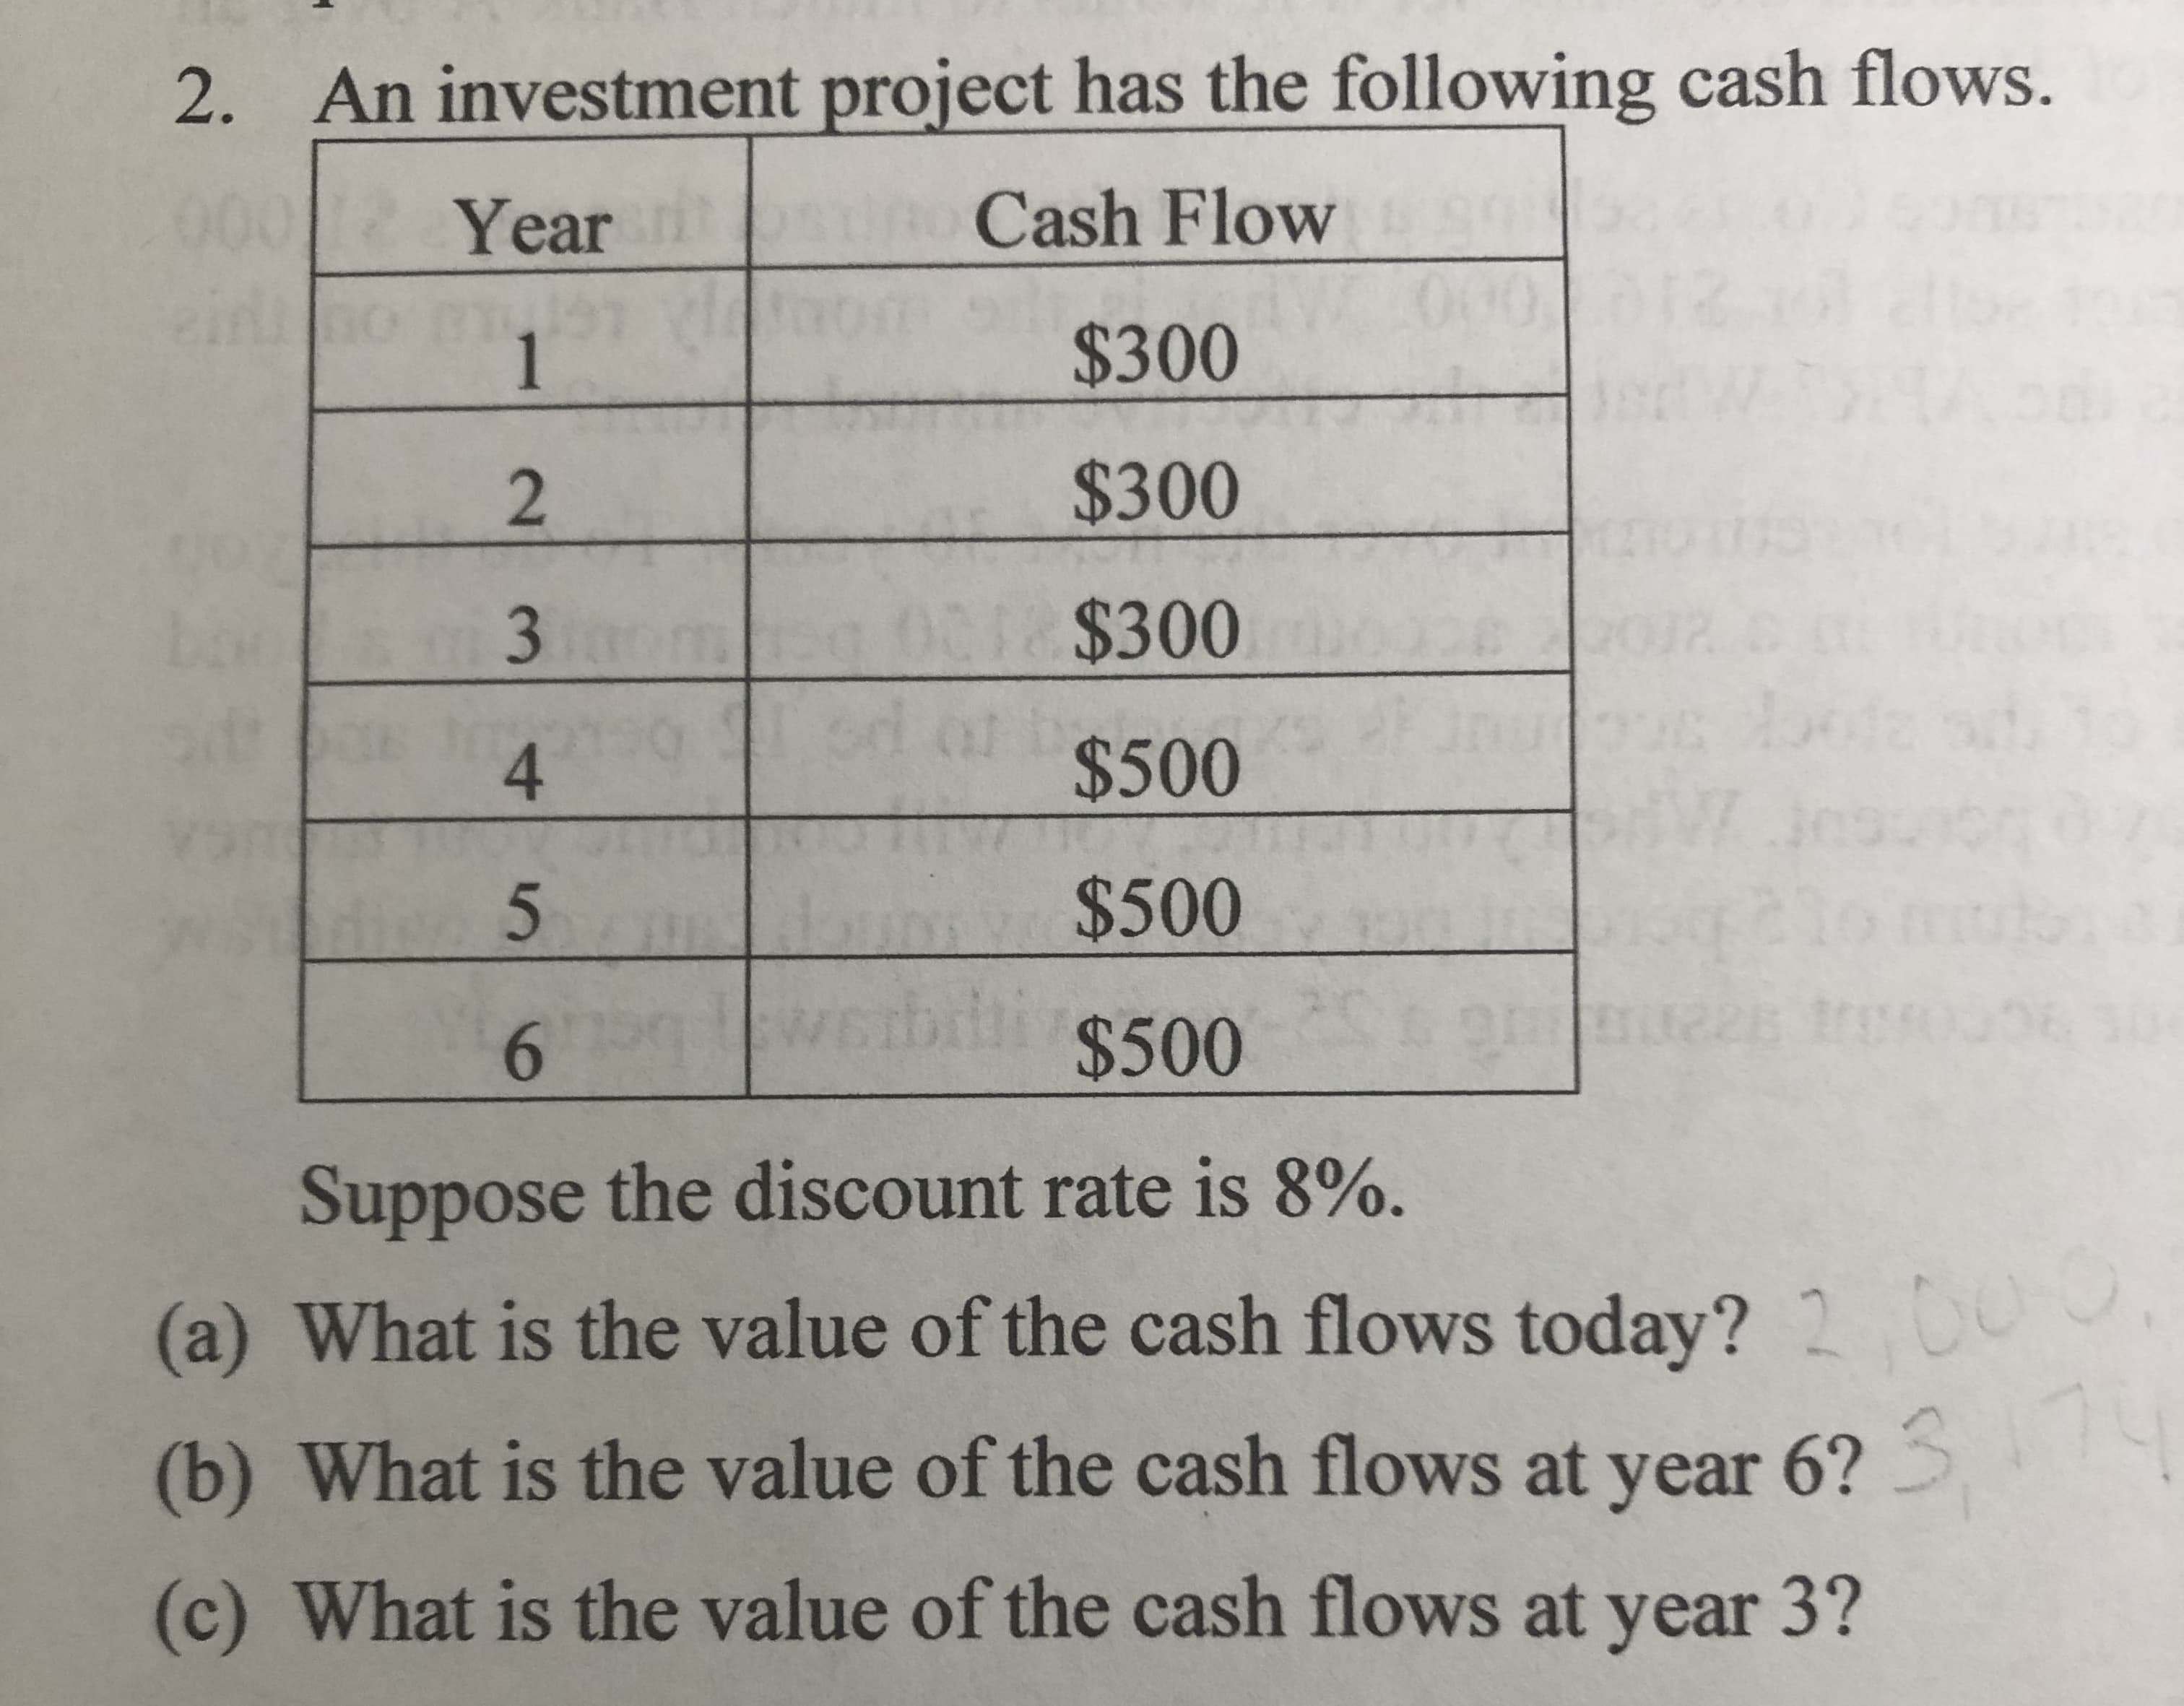 An investment project has the following cash flows.
2.
001 :
Cash Flow
Year
060
$300
1
$300
2
01 $300
3
4F
$500
4
$500
21
bdl $500
6
Suppose the discount rate is 8%.
(a) What is the value of the cash flows today? 2
00
14
(b) What is the value of the cash flows at year 6?
(c) What is the value of the cash flows at year 3?
3E
